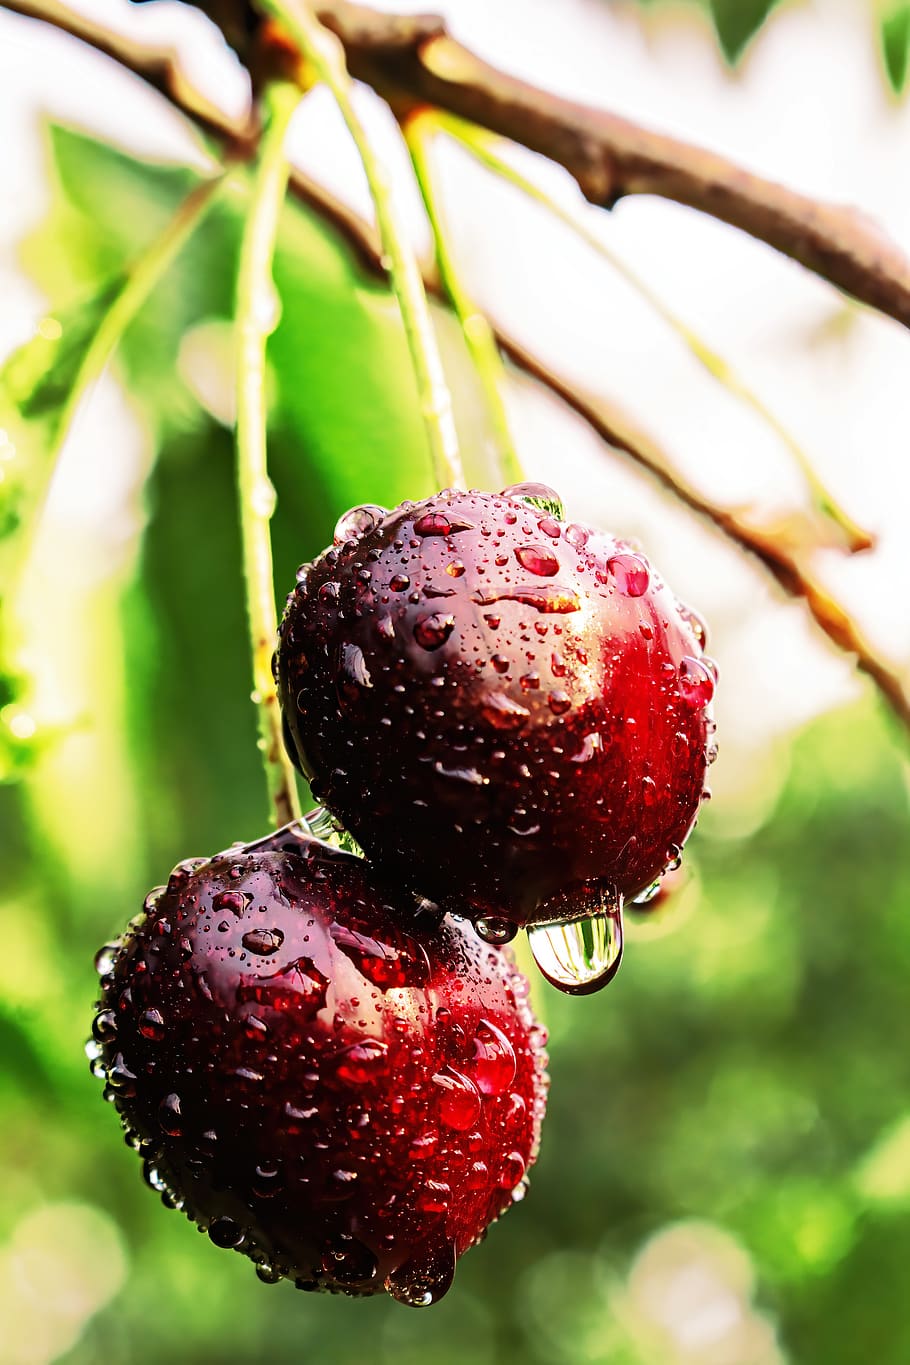 two, 2, couple, cherry, red, dark, leaves, water drop, water, drops